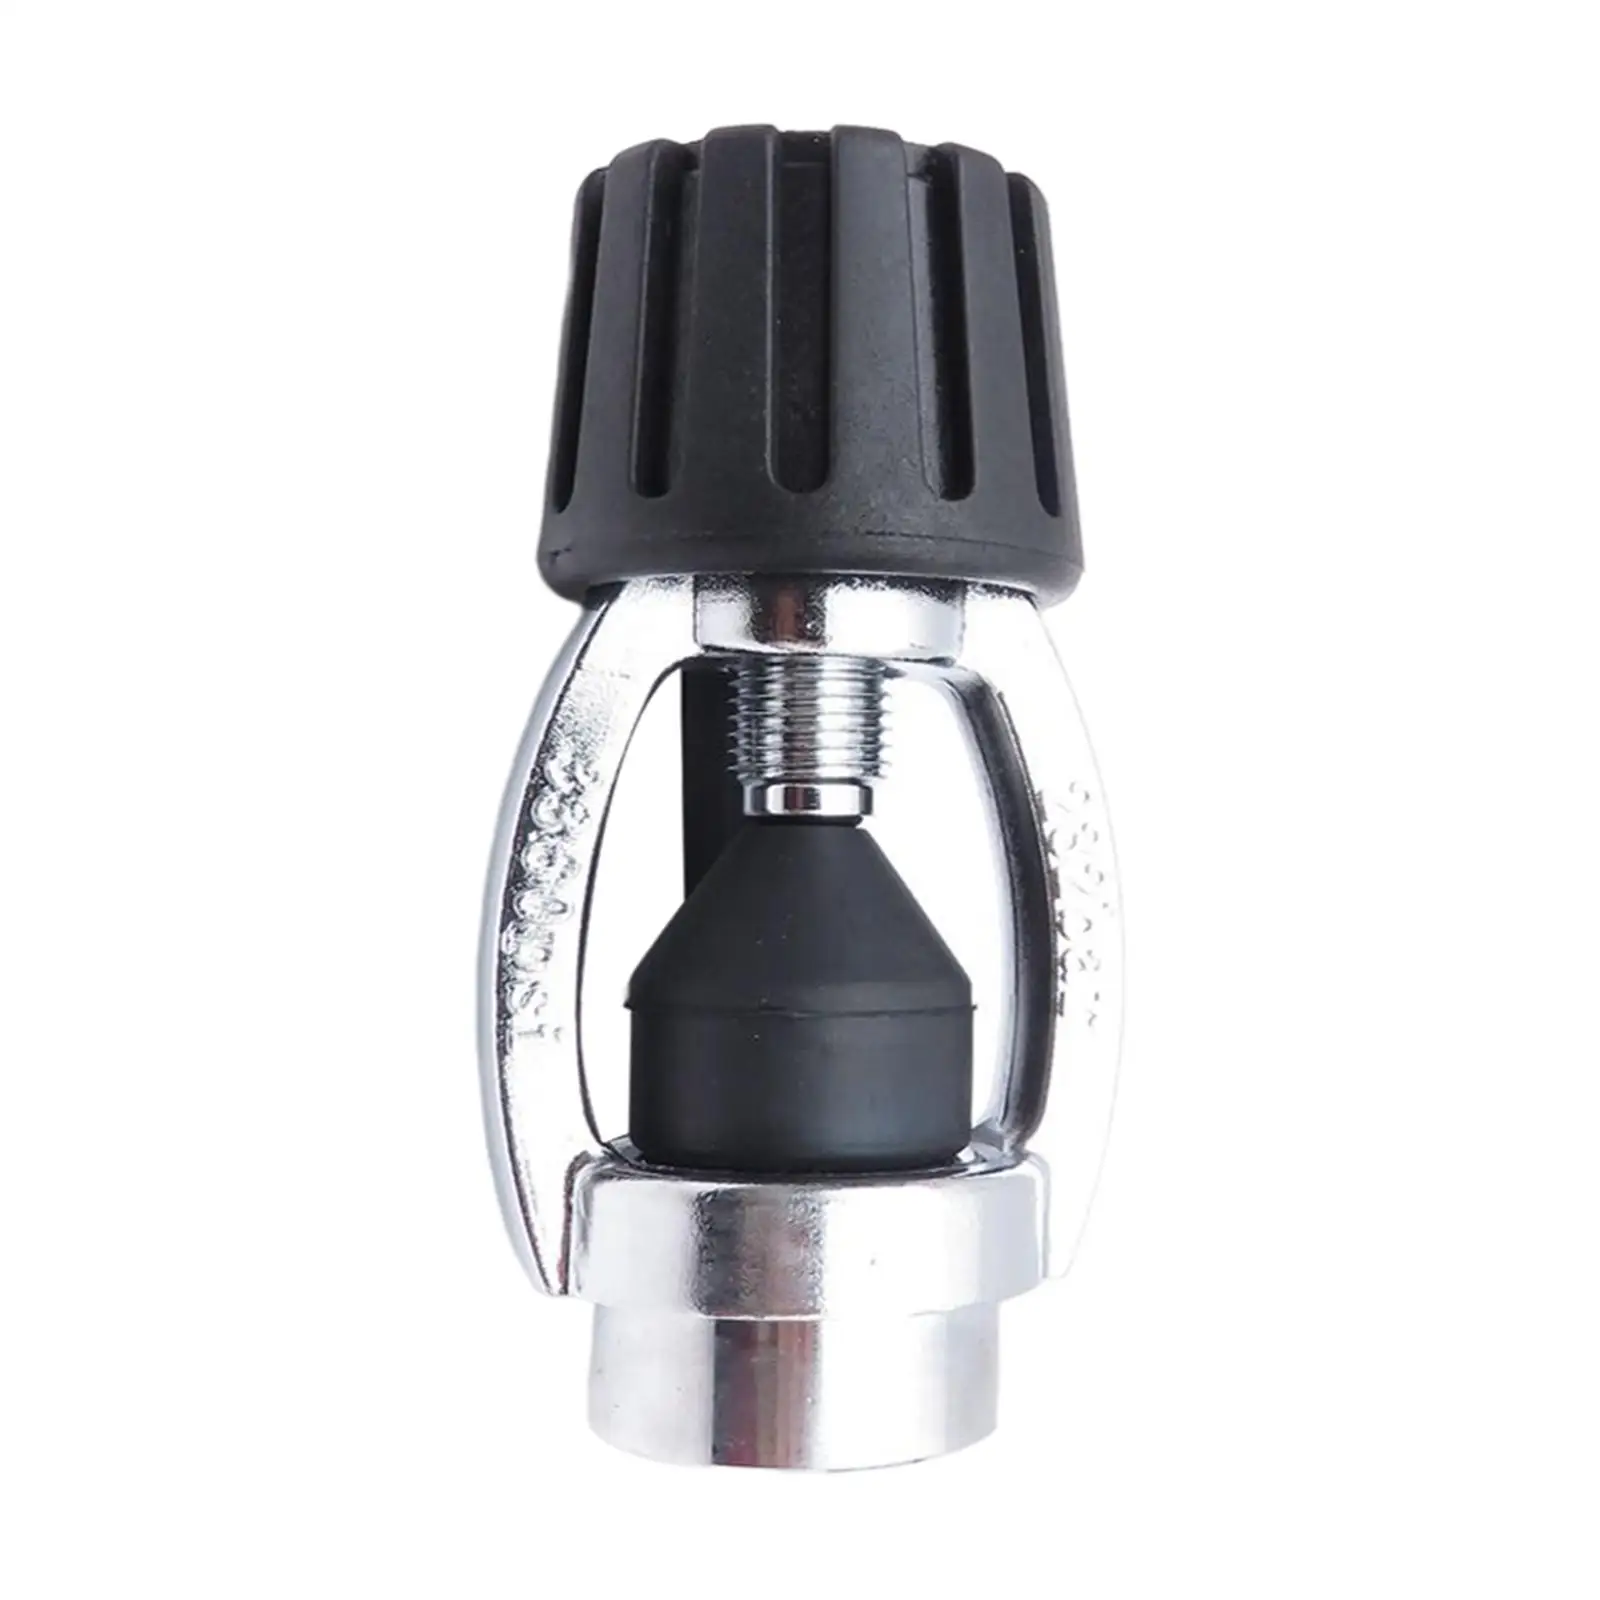 

Scuba Diving to Yoke Adaptor 1ST Stage Adapter D2Y Adapter with Dust Caps Convertor for Scuba Diving Tank Regulator